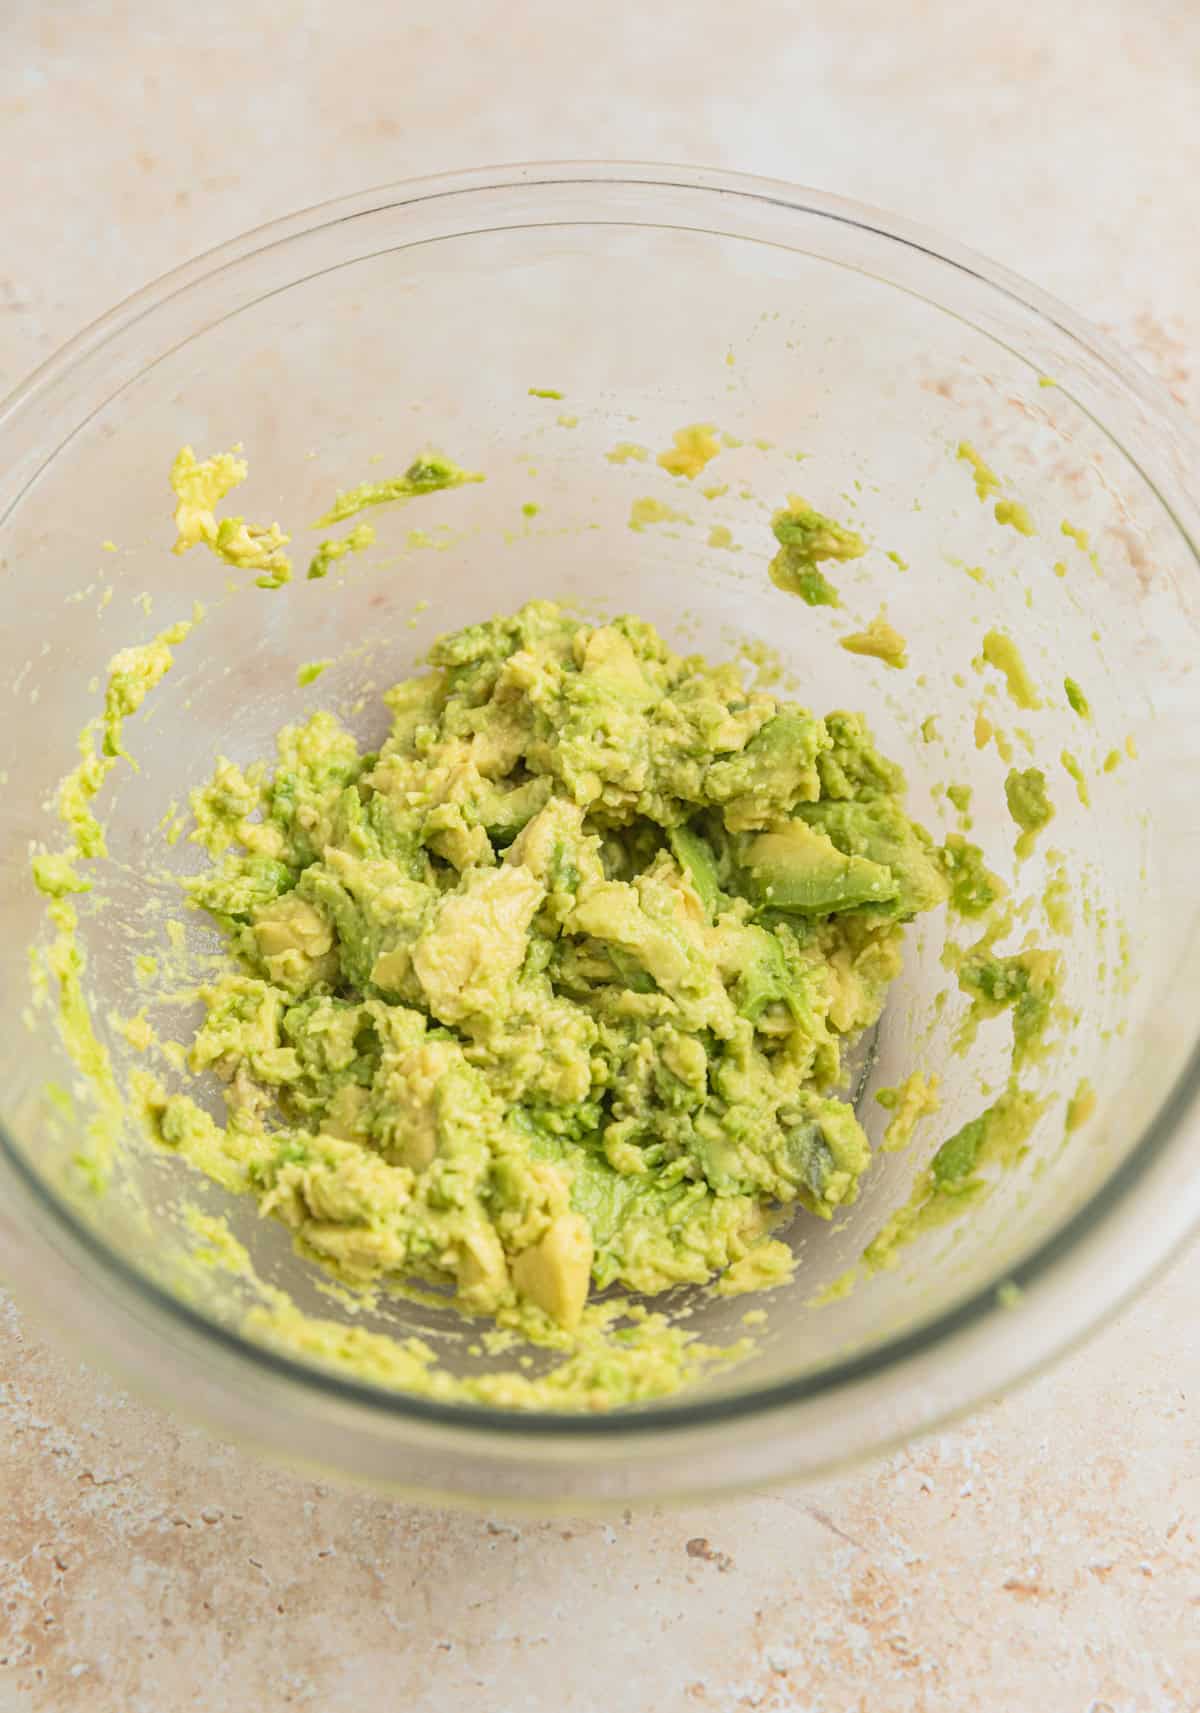 Glass mixing bowl with mashed avocado.